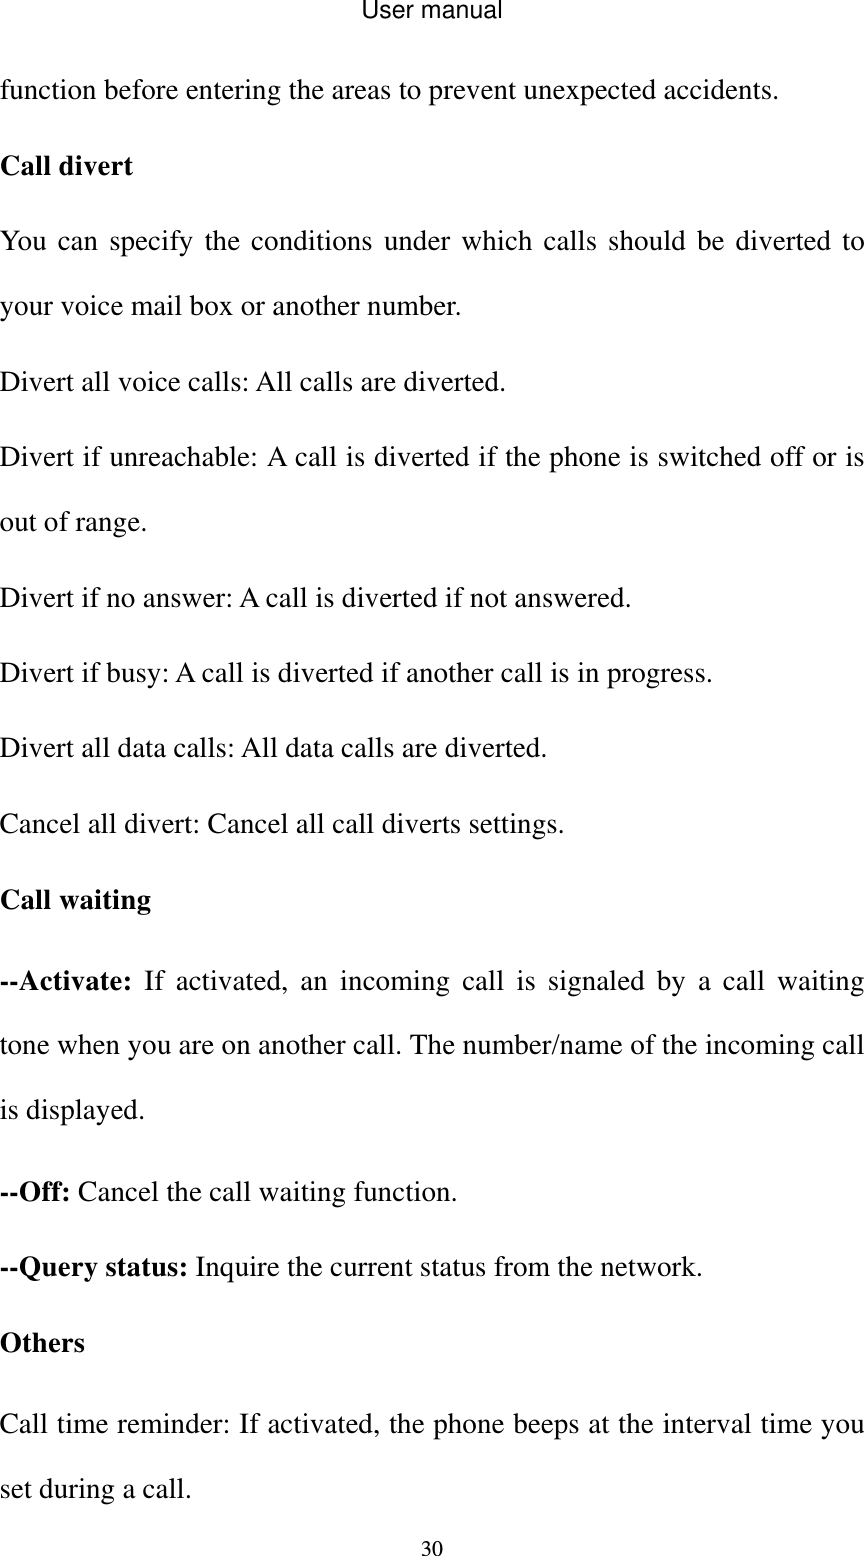 User manual  30function before entering the areas to prevent unexpected accidents. Call divert You can specify the conditions under which calls should be diverted to your voice mail box or another number. Divert all voice calls: All calls are diverted. Divert if unreachable: A call is diverted if the phone is switched off or is out of range. Divert if no answer: A call is diverted if not answered. Divert if busy: A call is diverted if another call is in progress. Divert all data calls: All data calls are diverted. Cancel all divert: Cancel all call diverts settings. Call waiting --Activate: If activated, an incoming call is signaled by a call waiting tone when you are on another call. The number/name of the incoming call is displayed. --Off: Cancel the call waiting function. --Query status: Inquire the current status from the network. Others Call time reminder: If activated, the phone beeps at the interval time you set during a call. 